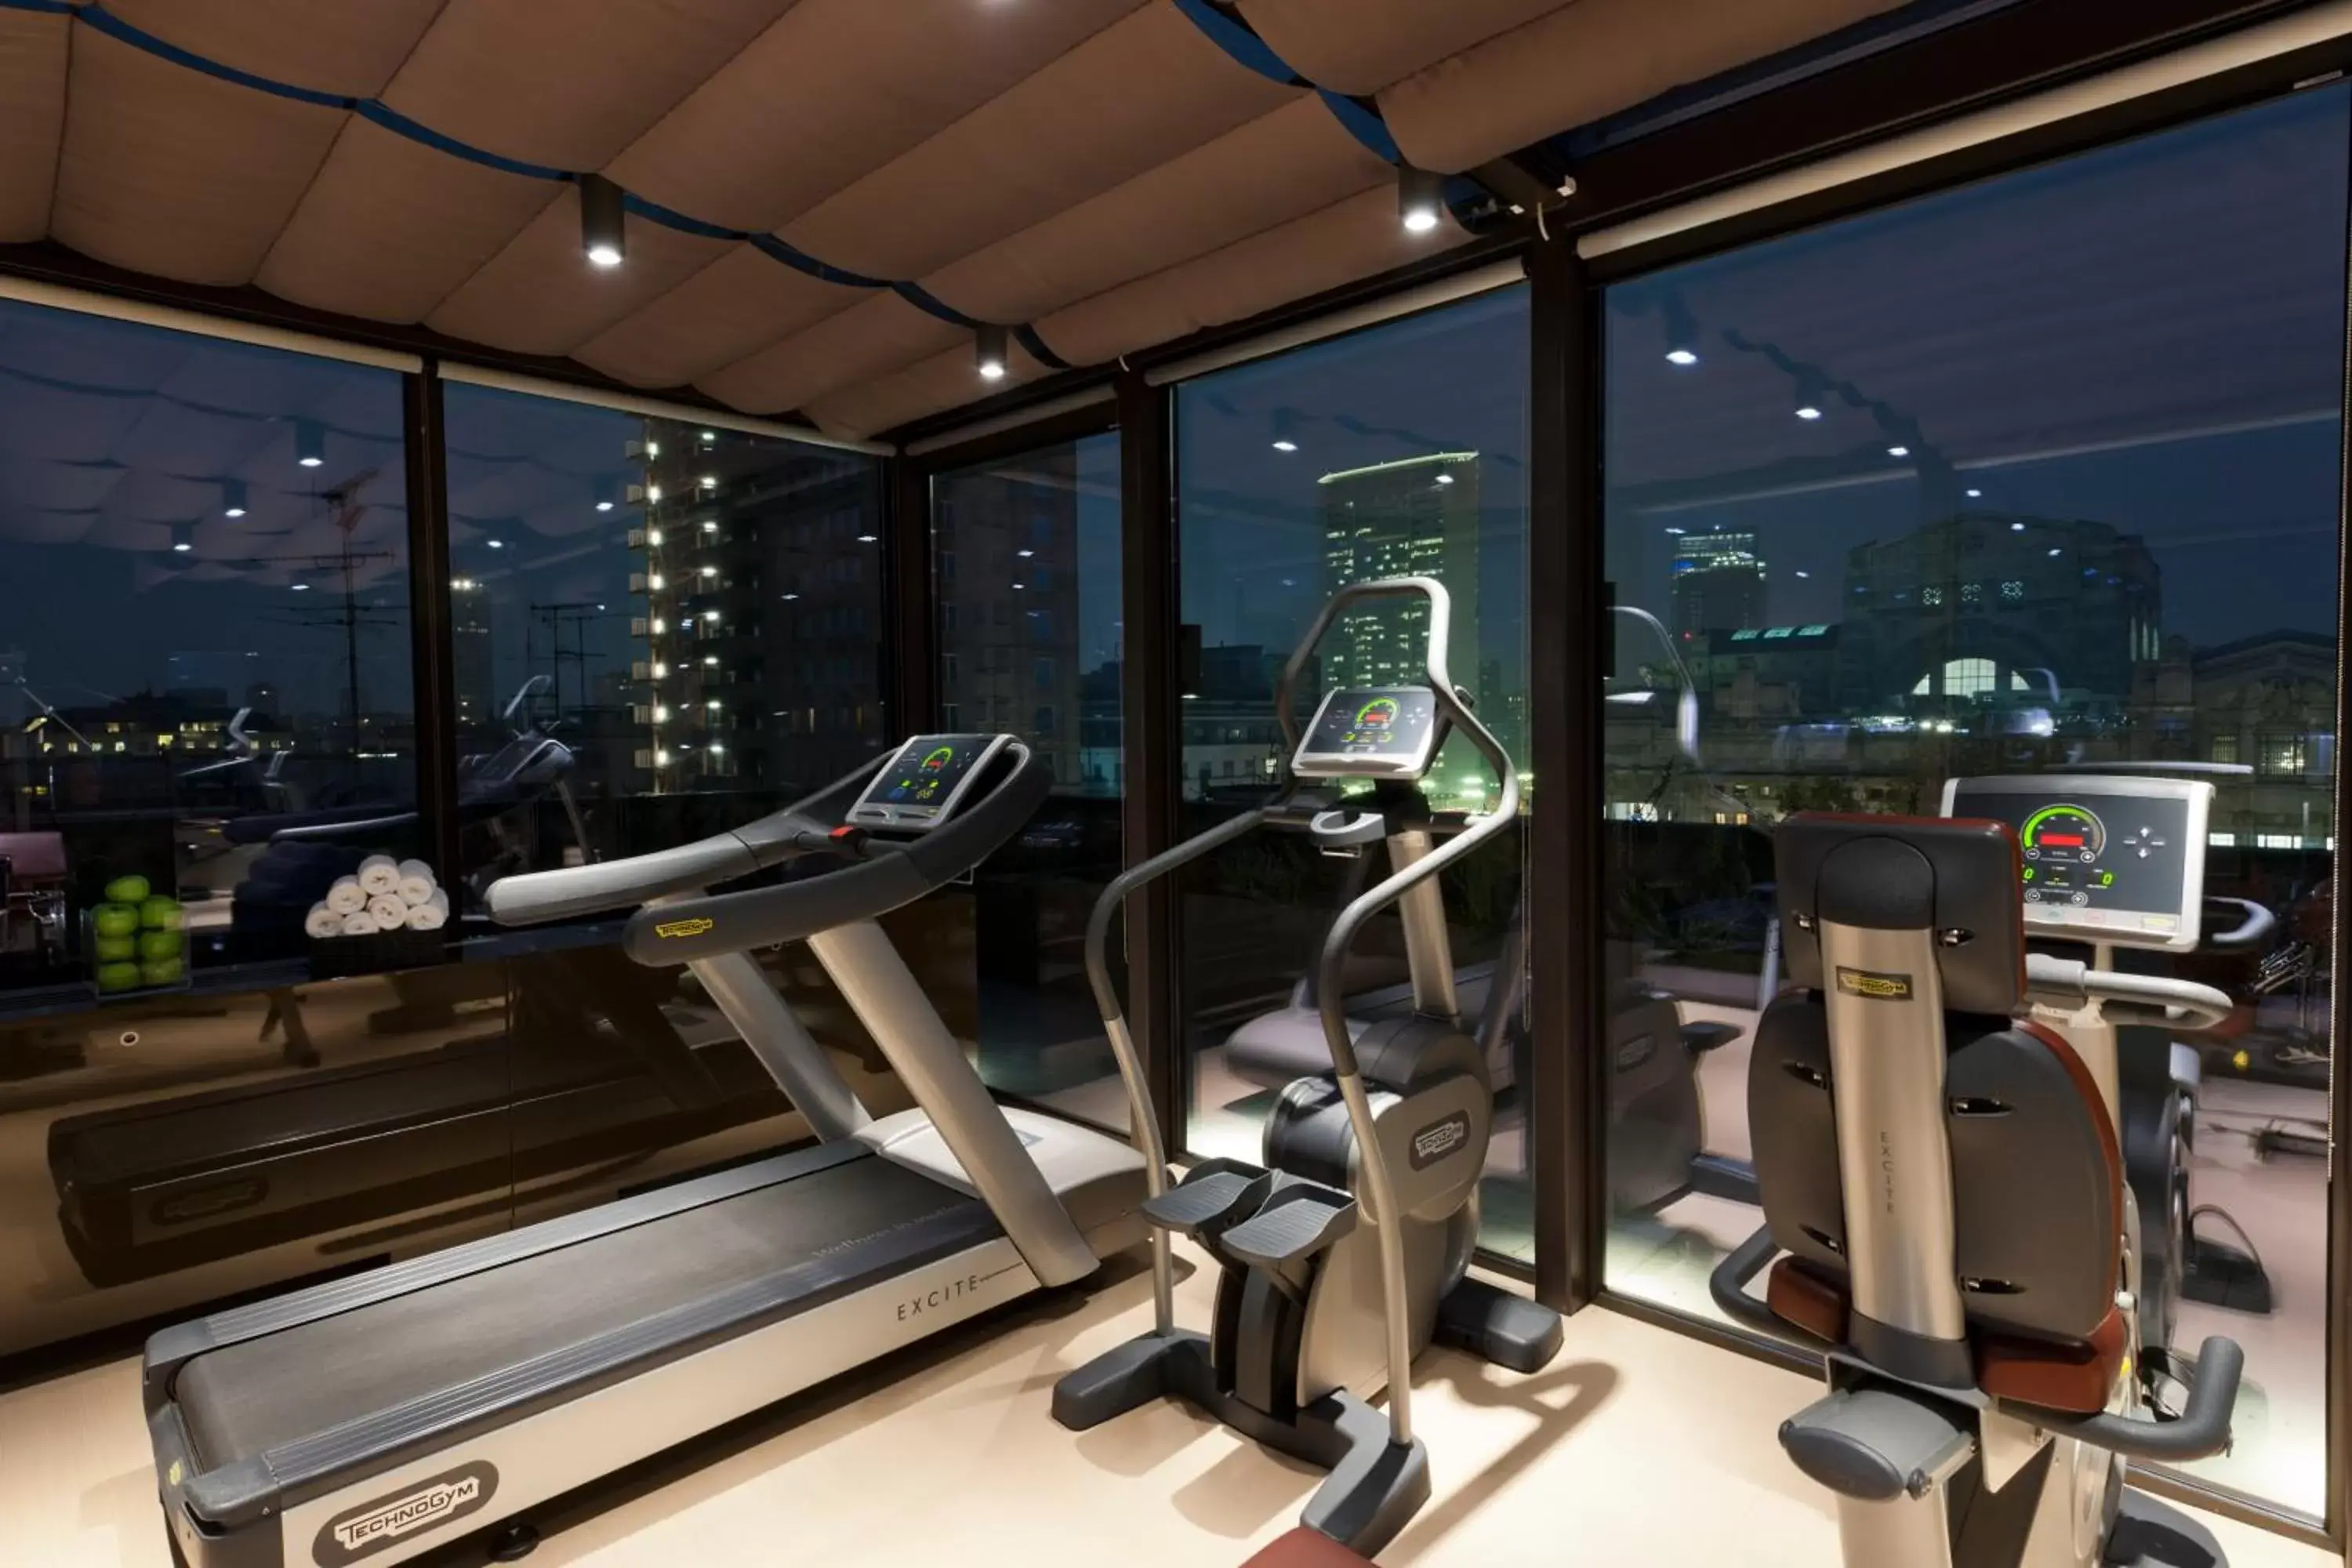 Fitness centre/facilities, Fitness Center/Facilities in Starhotels Echo